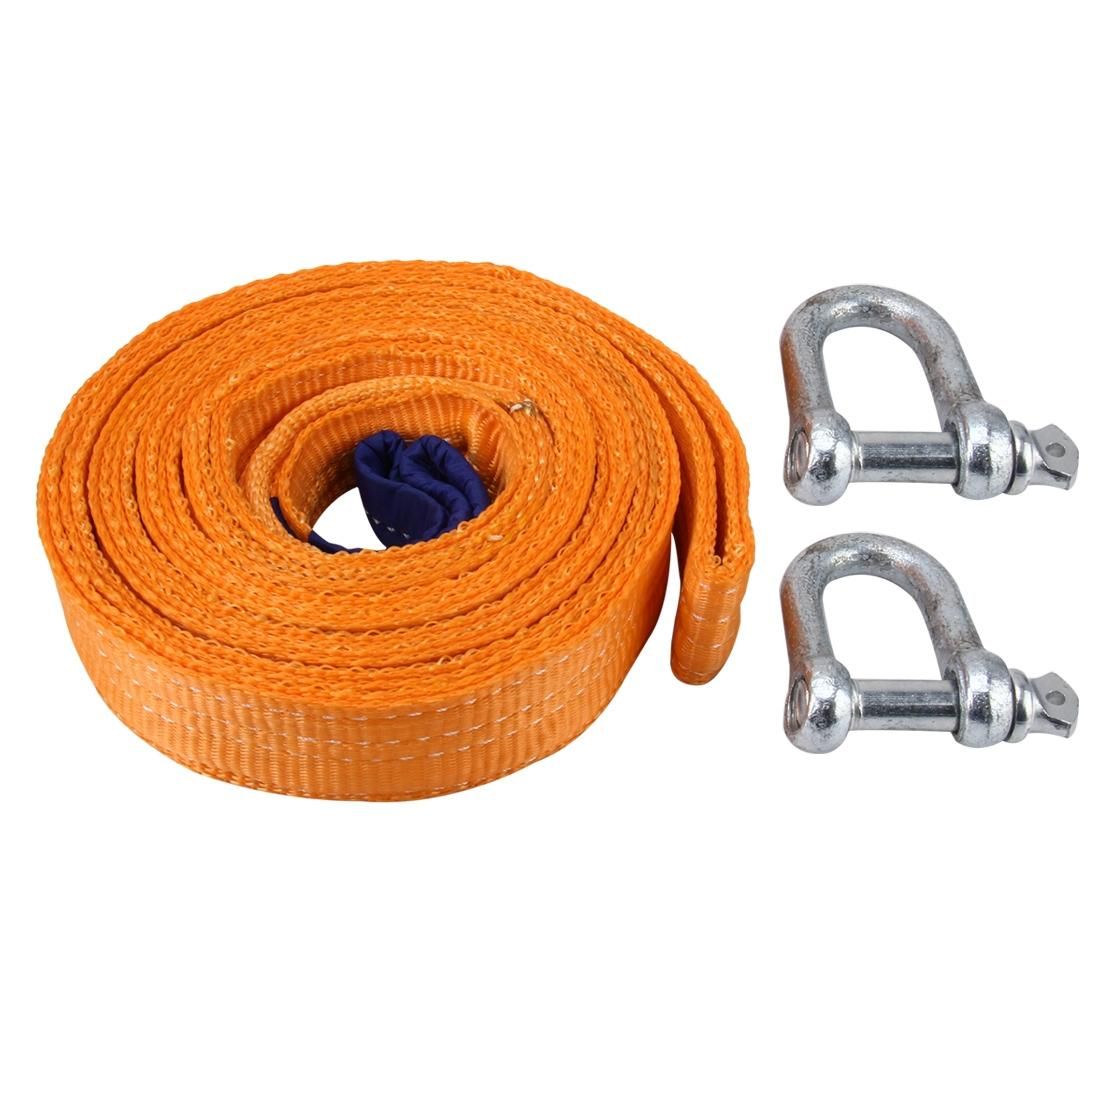 ZONGYUAN ZY-0223 Car 5m�5cm 8 Ton Towing 2 Ton Lifting Rope Straps with Two Hooks High Strength Cable Cord Heavy Duty Recovery Securing Accessories for Cars Trucks